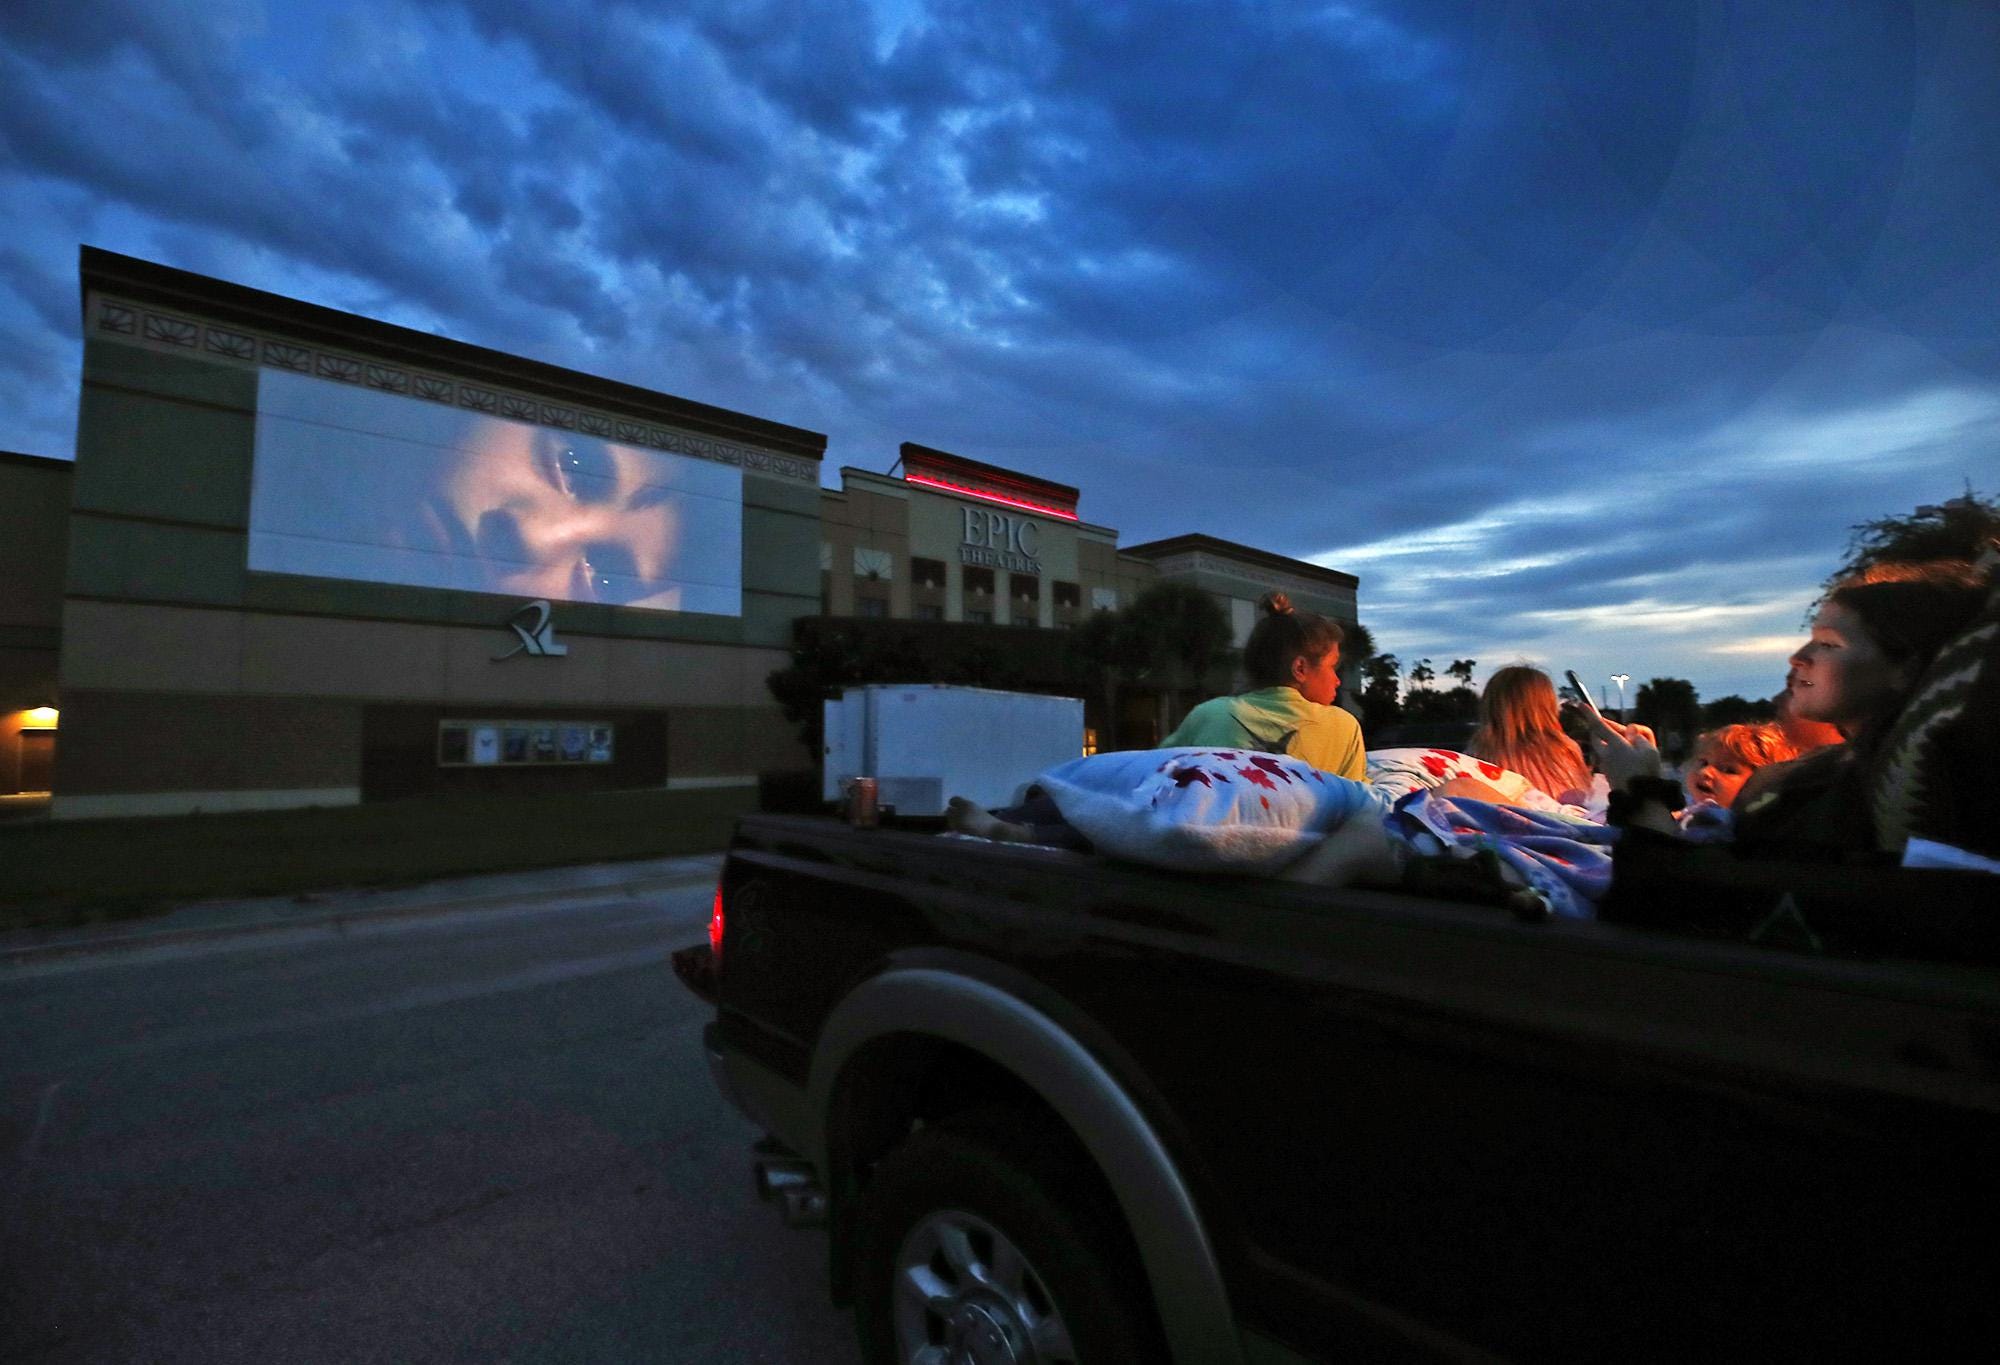 Classic Movies Old And New At Epic Theatres Deltona Drive-in